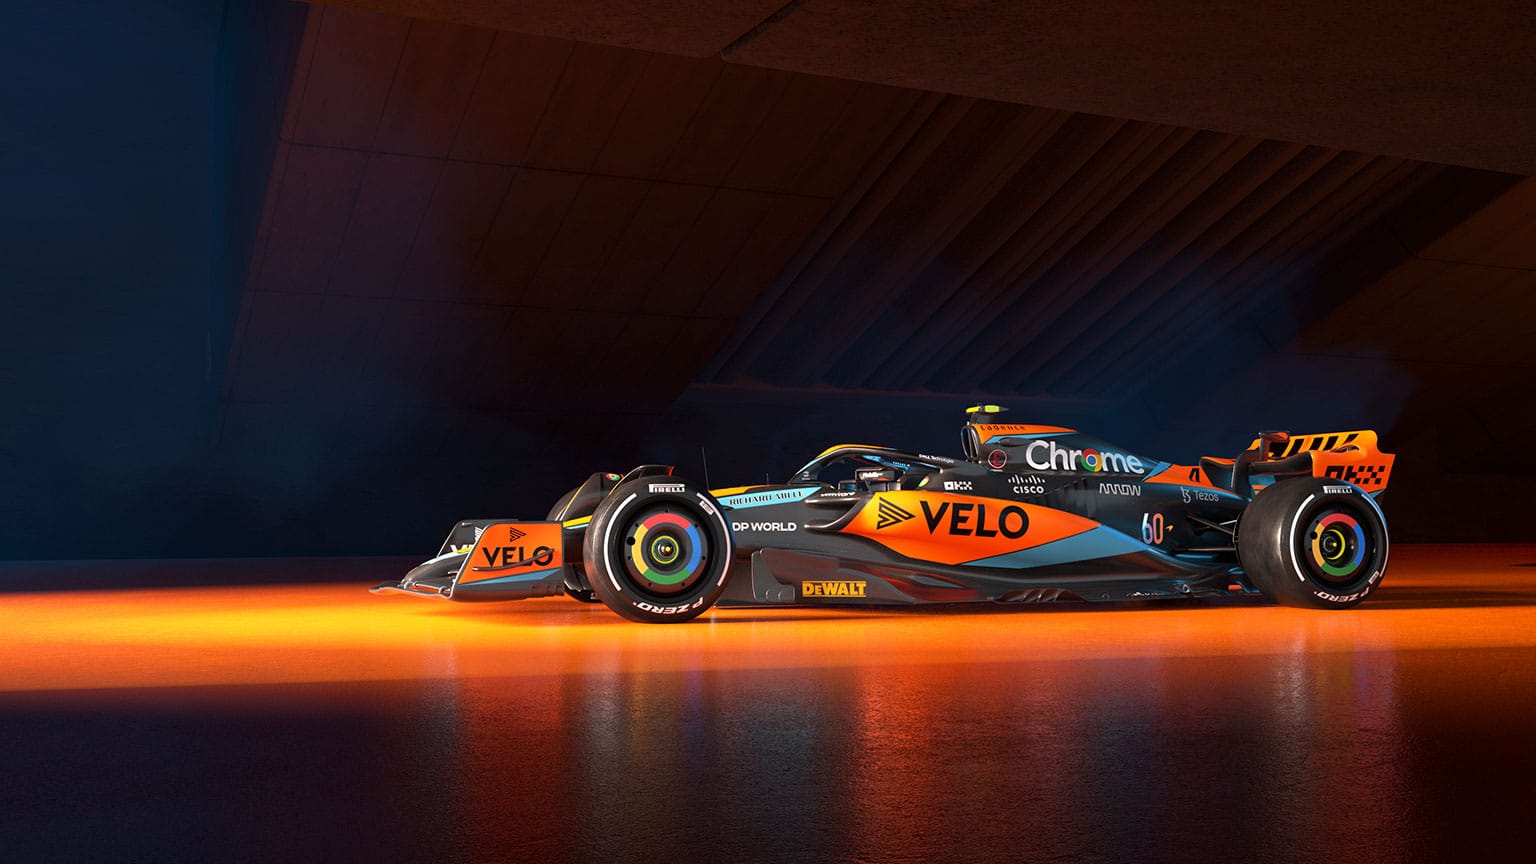 The new MCL60